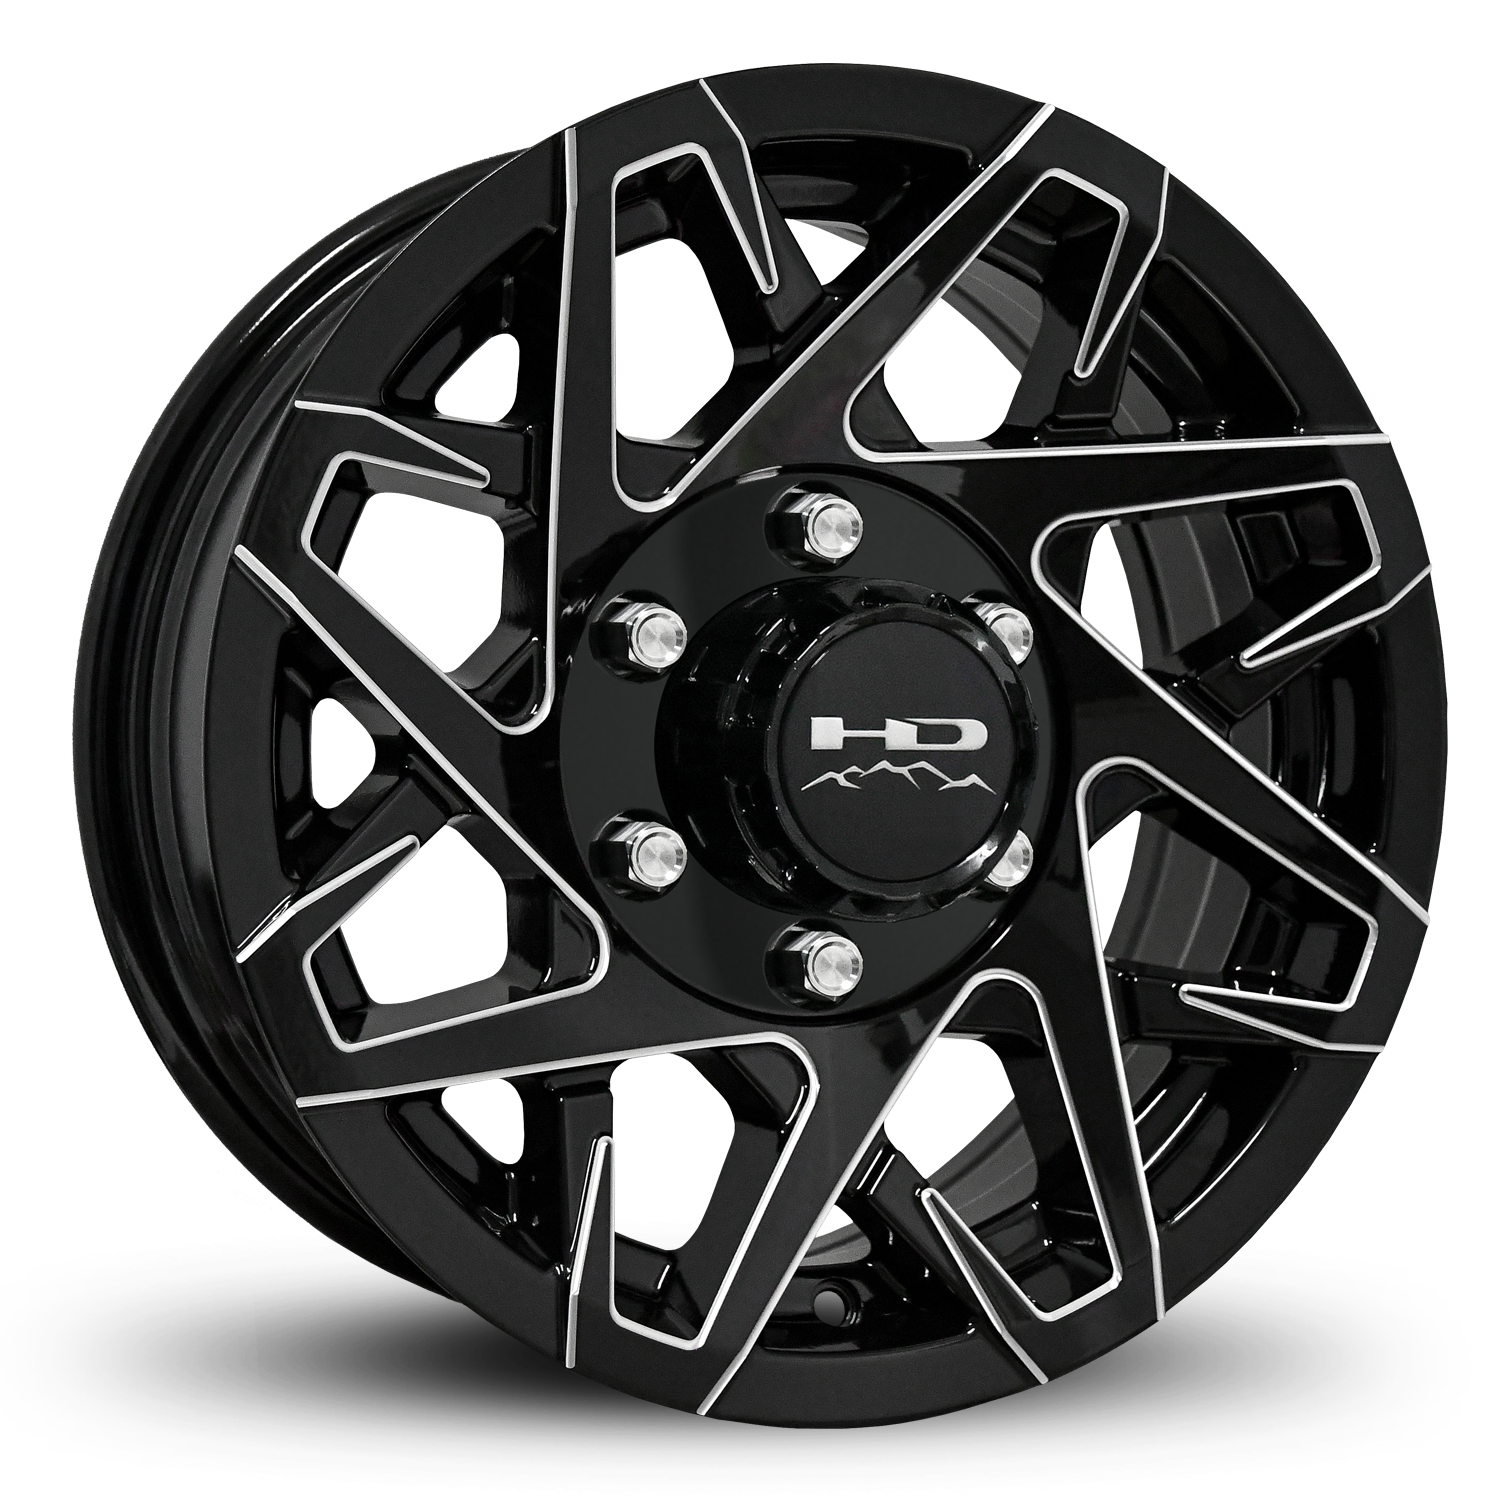 HD Off-Road Canyon Custom Trailer Wheel Rims in 15x6.0  15x6 Gloss Black CNC Milled Spoke Edges with Center Cap & Logo fits 6x5.50 / 6x139.7 Axle Boat, Car, RV, Travel, Concession, Horse, Utility, Lawn & Garden, & Landscaping.